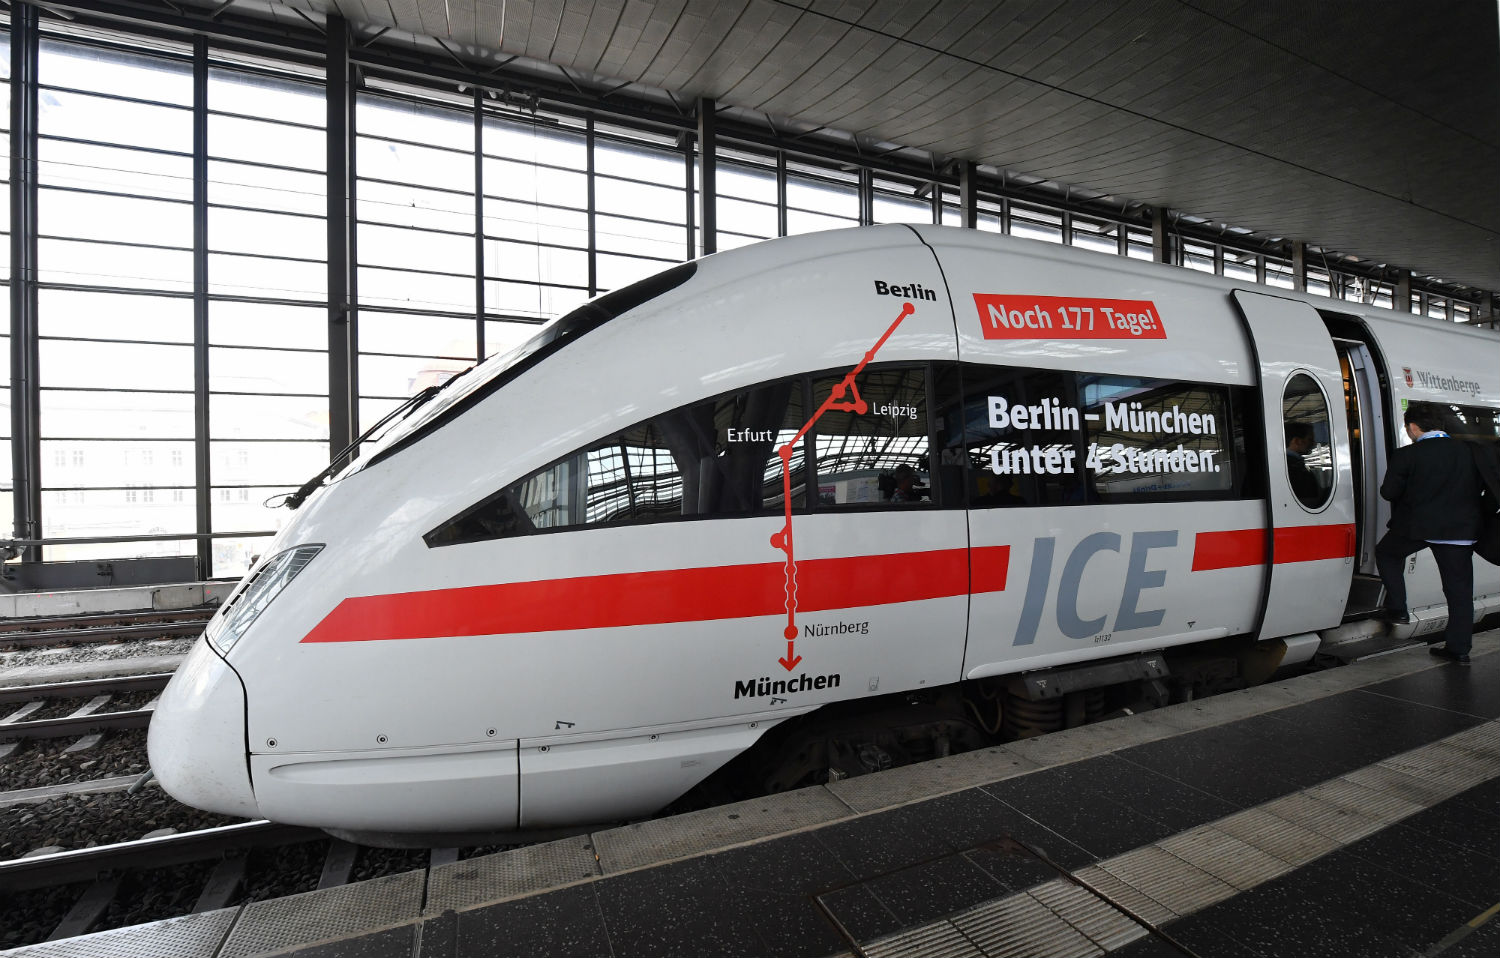 News: Berlin to Munich on a high-speed train, now in under 4hrs